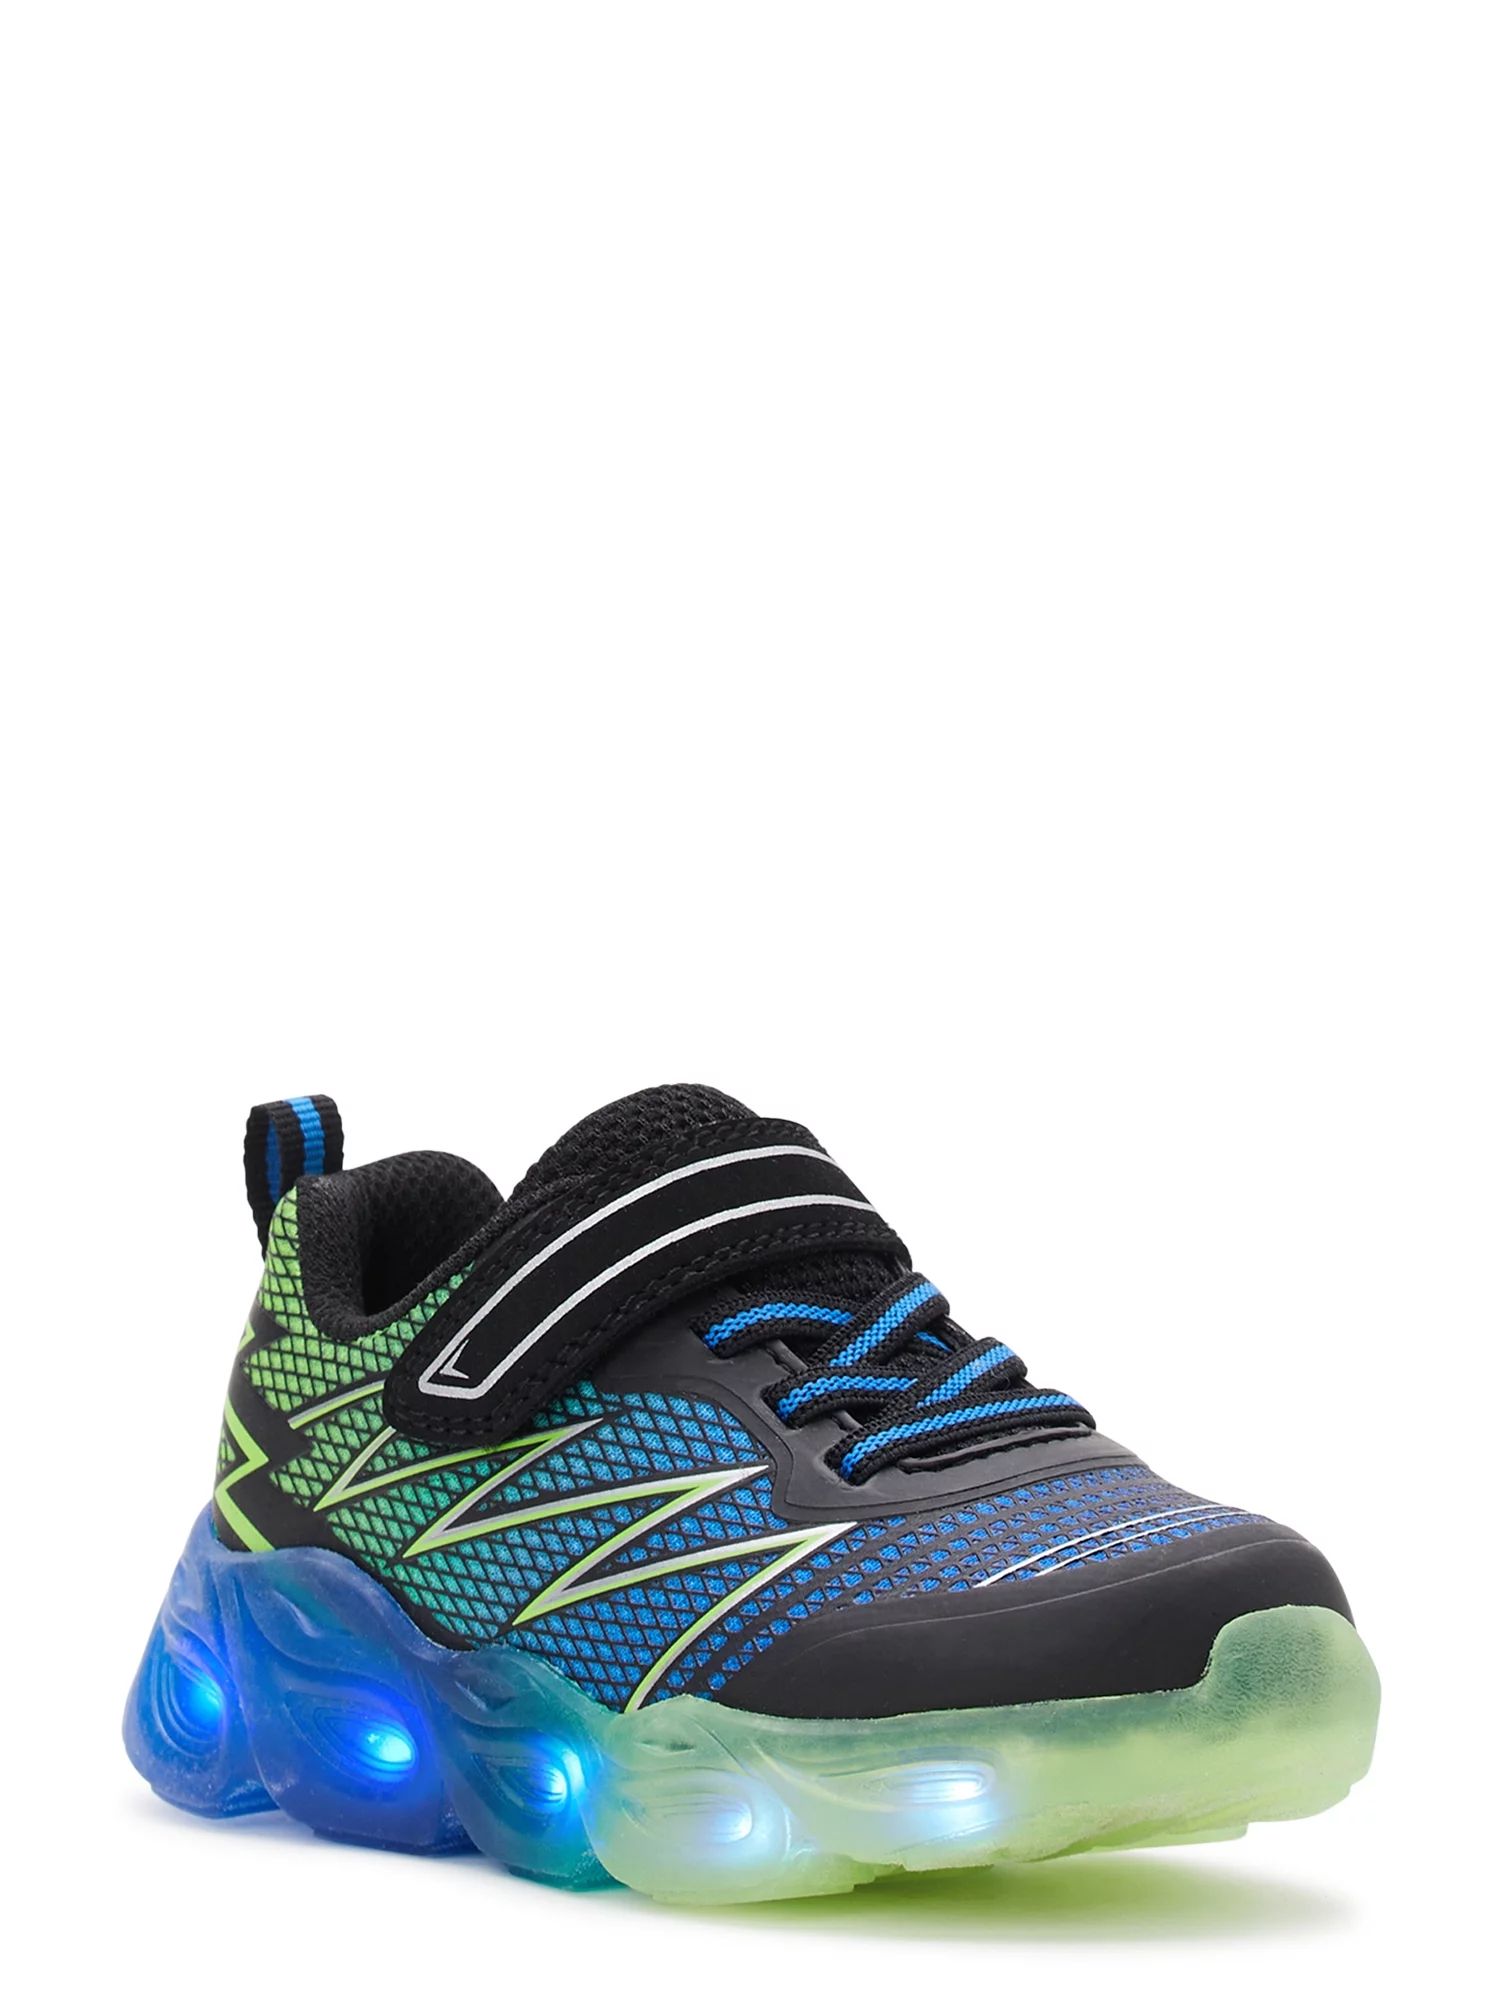 Athletic Works Toddler Boys Light-Up Athletic Sneakers, Sizes 7-12 | Walmart (US)